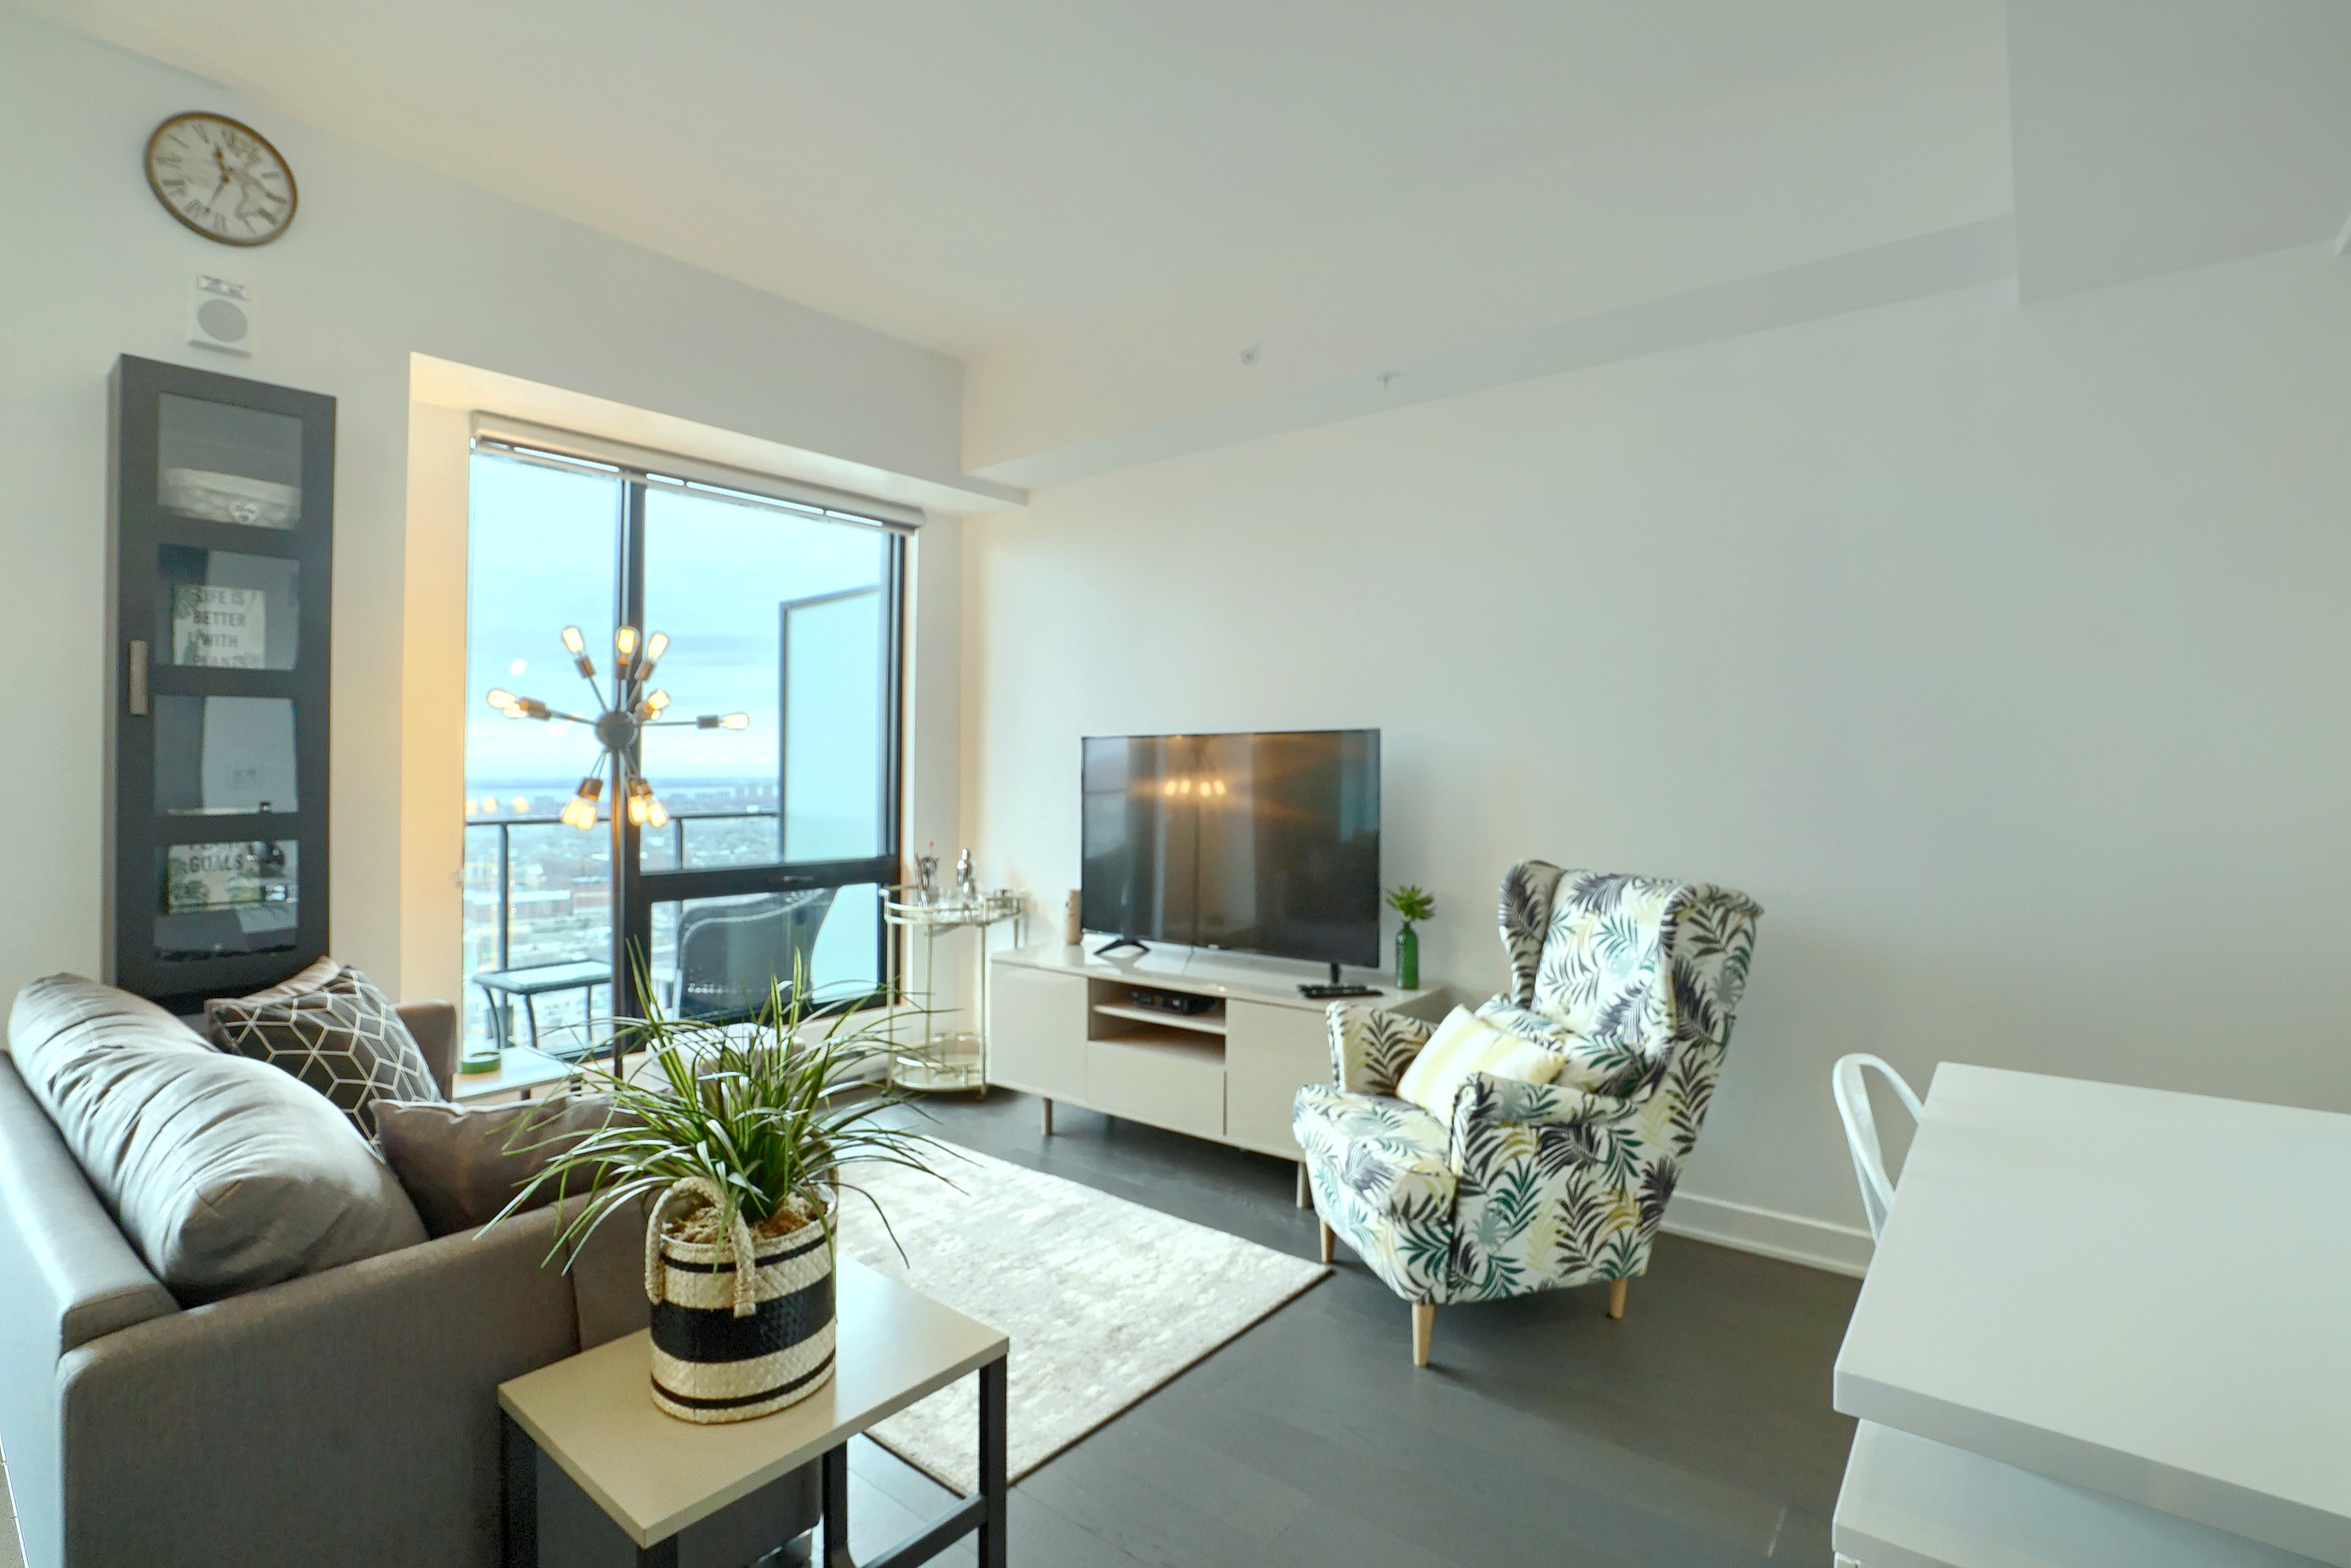 Side view of the living area showing the floor-to-ceiling window, designer couch and chair, flat screen TV, white walls and darker wood flooring. A perfect furnished corporate apartment in montreal